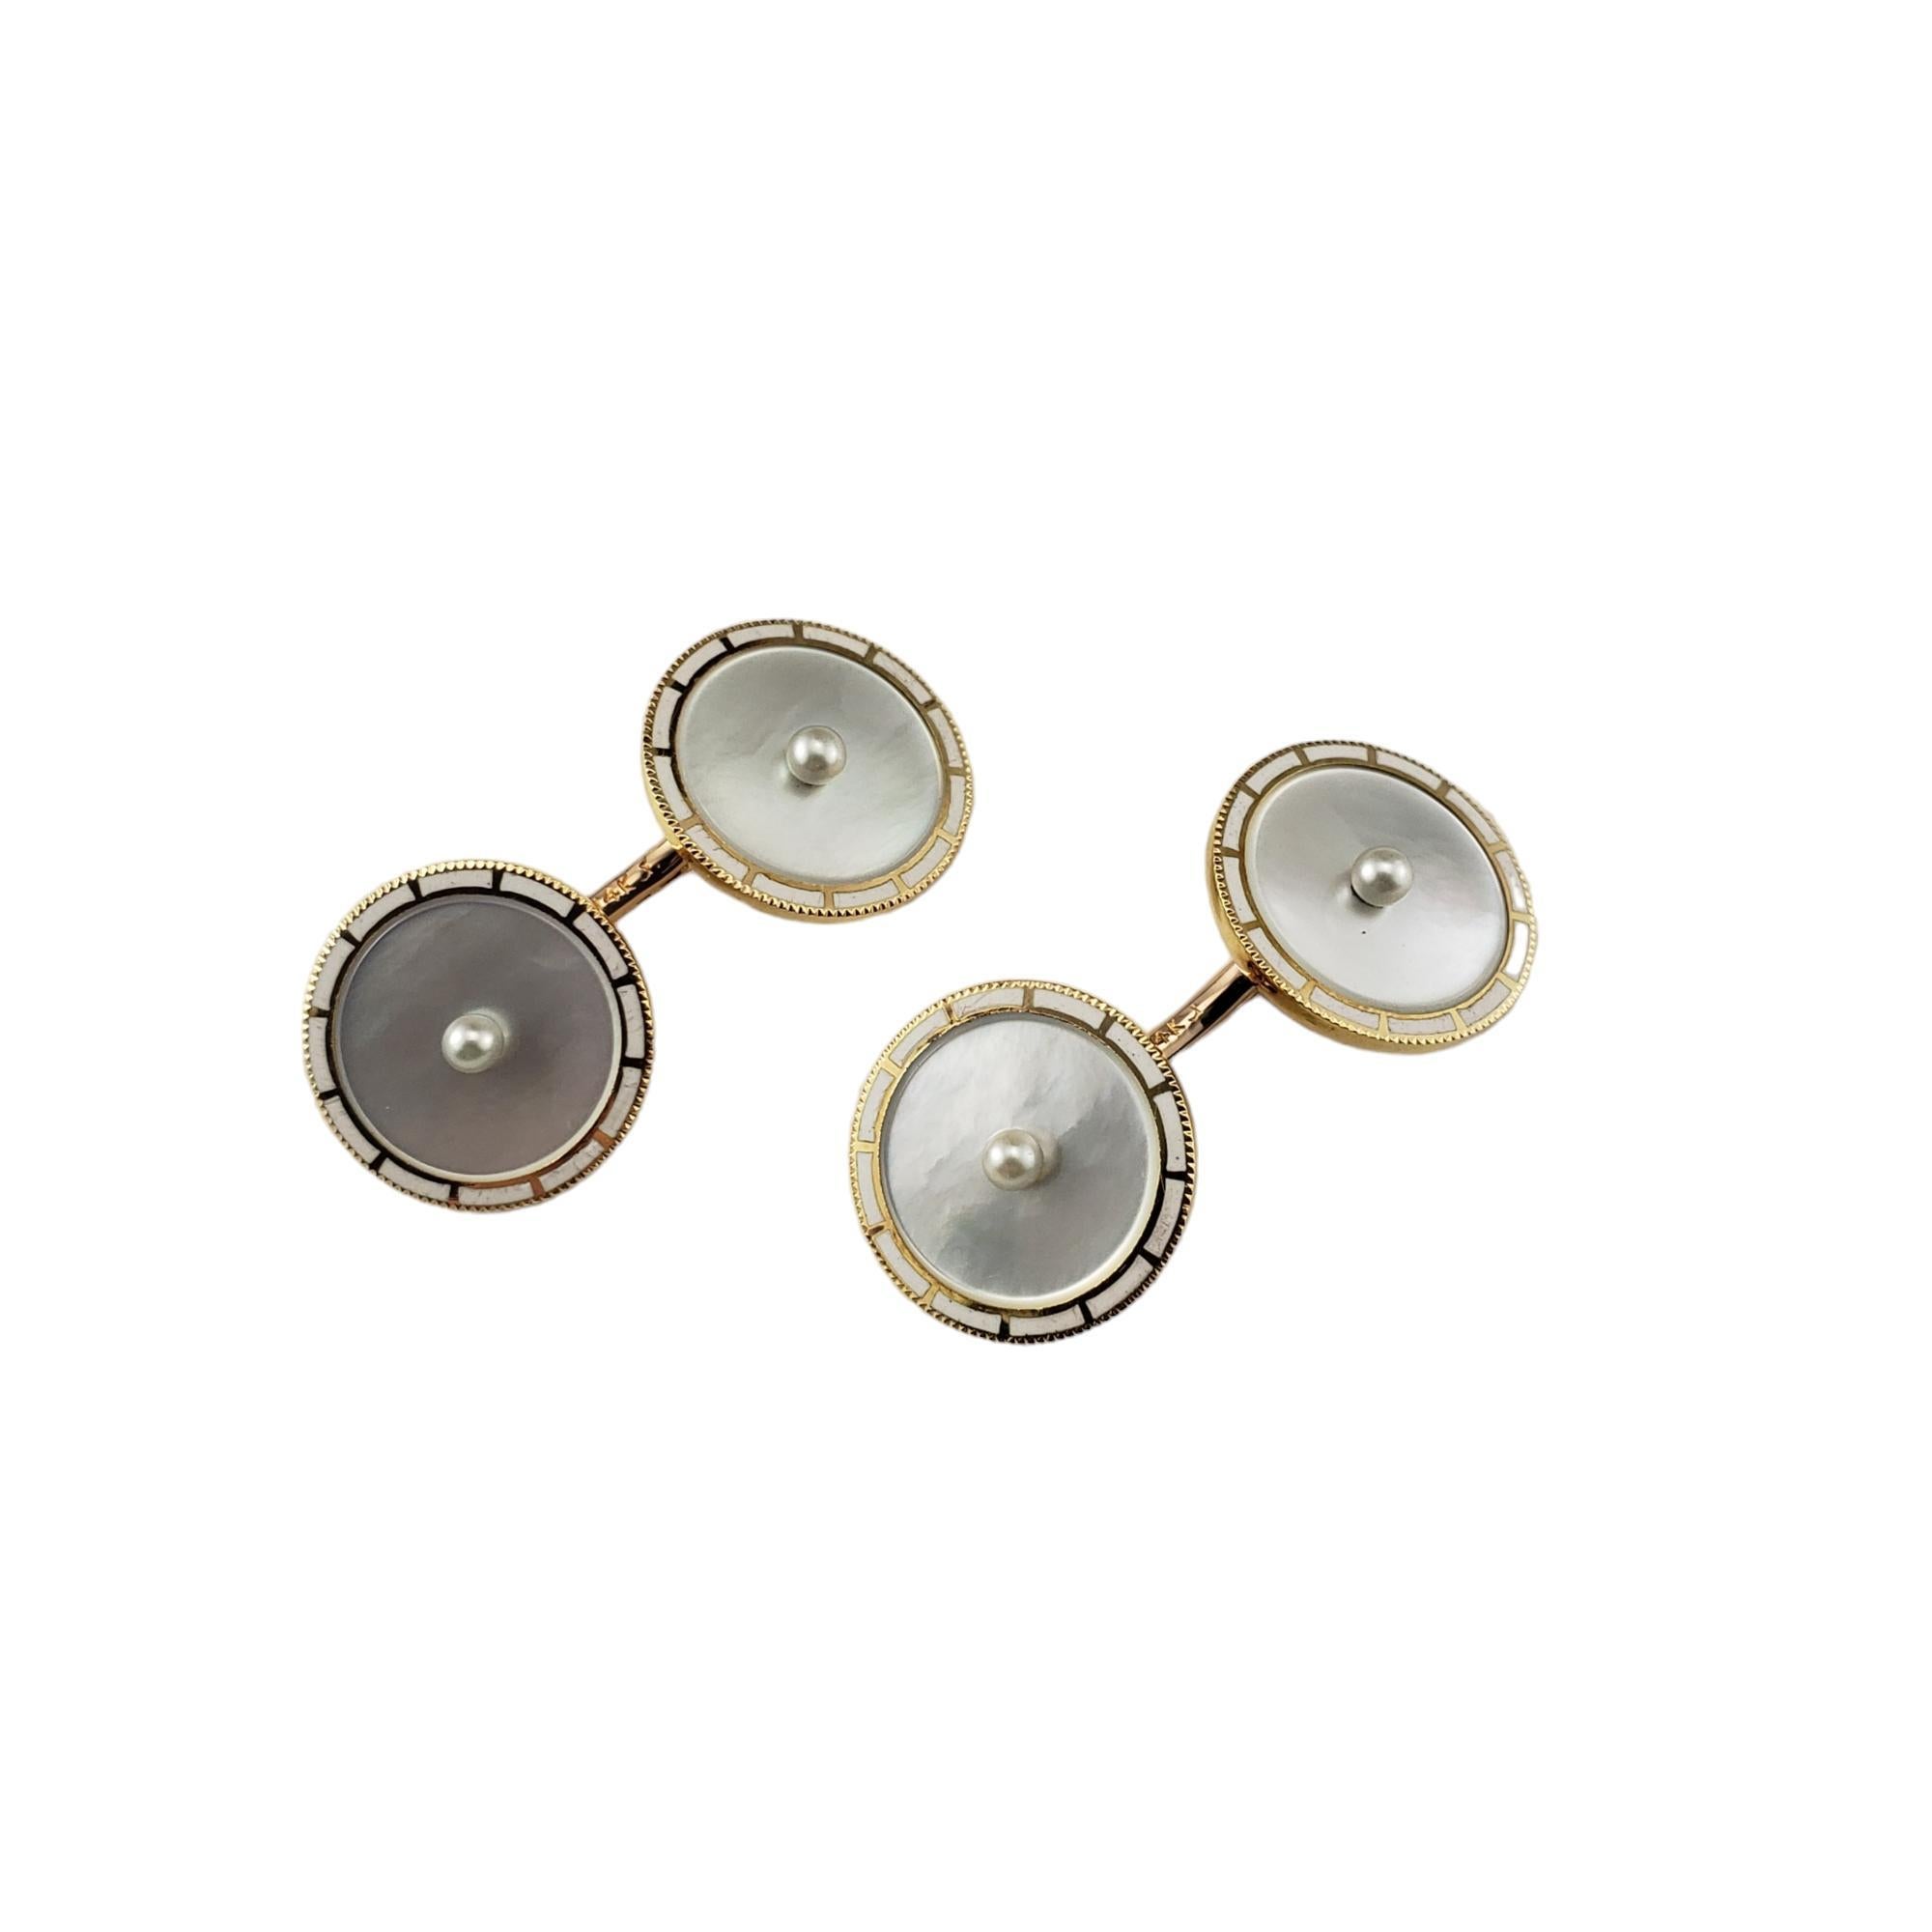 Vintage 14K Yellow Gold Mother of Pearl Cufflinks-

These elegant mother of pearl cufflinks each feature one white pearl set in beautifully detailed 14K yellow gold.

Size: 30 mm x 14 mm

Stamped: 14K

Weight: 5.0 dwt./ 7.8 gr.

Very good condition,